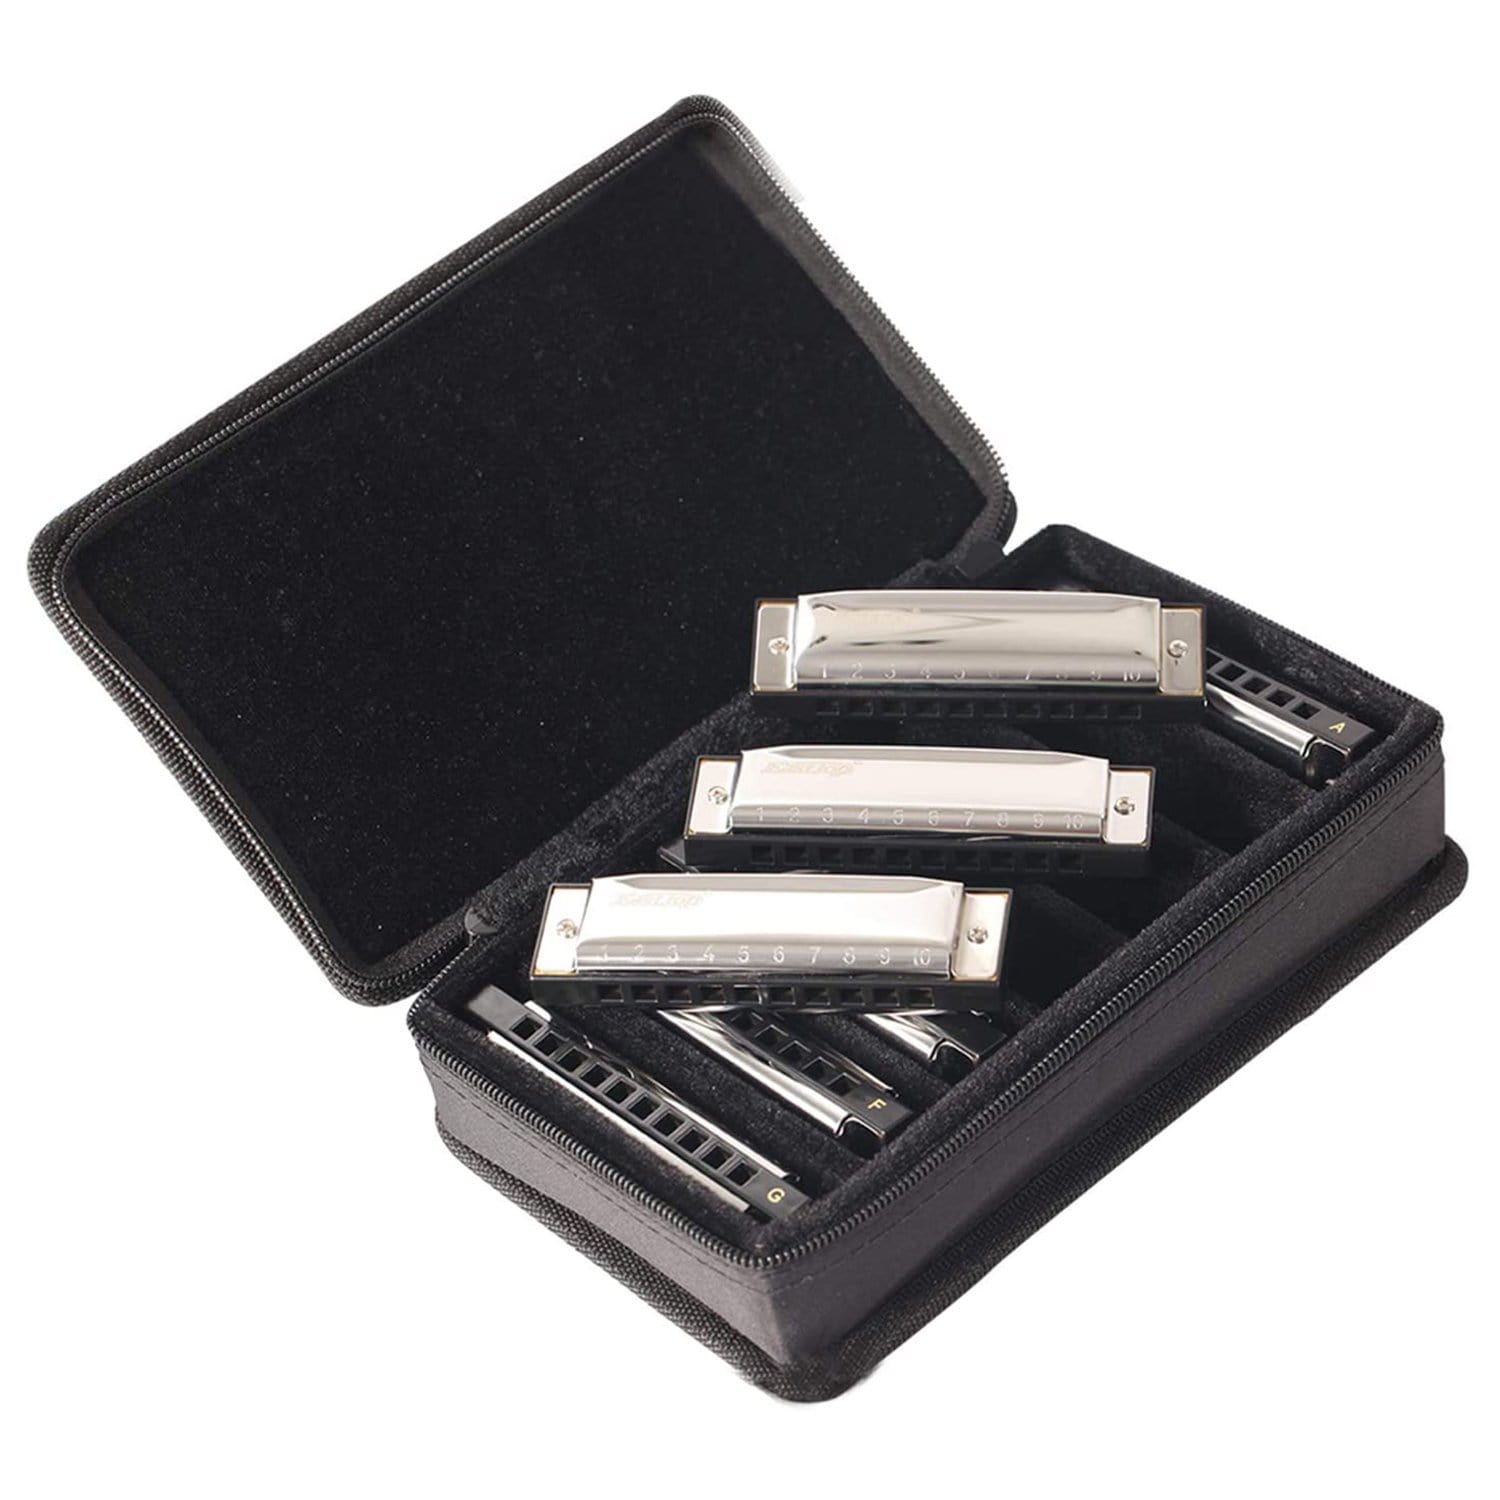 East top 10 Holes 20 Tones Blues C Diatonic Harmonica, Harmonica C For Adults, Beginners, Professional player and Students - Easttop harmonica